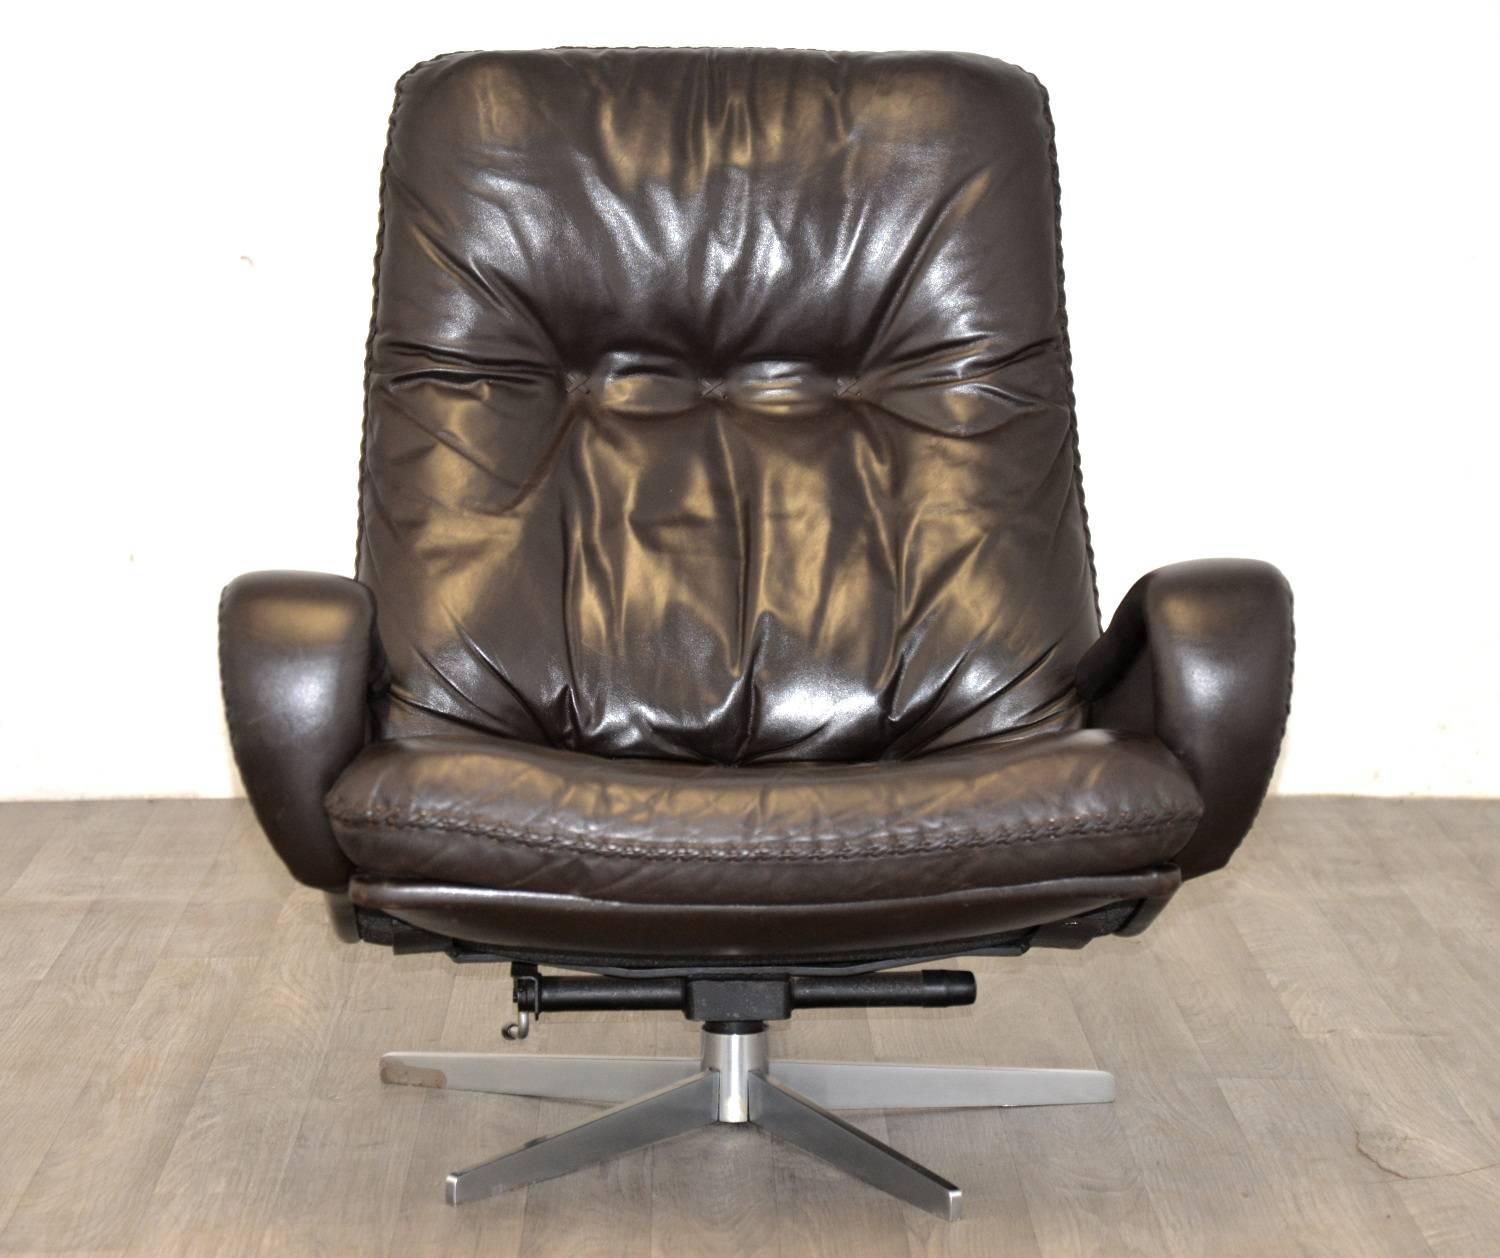 Discounted airfreight for our US and International customers (from 2 weeks door to door)

We bring to you an ultra-rare and highly desirable Vintage 1960s De Sede S 231 James Bond swivel lounge armchair with ottoman. This same swivel lounge armchair